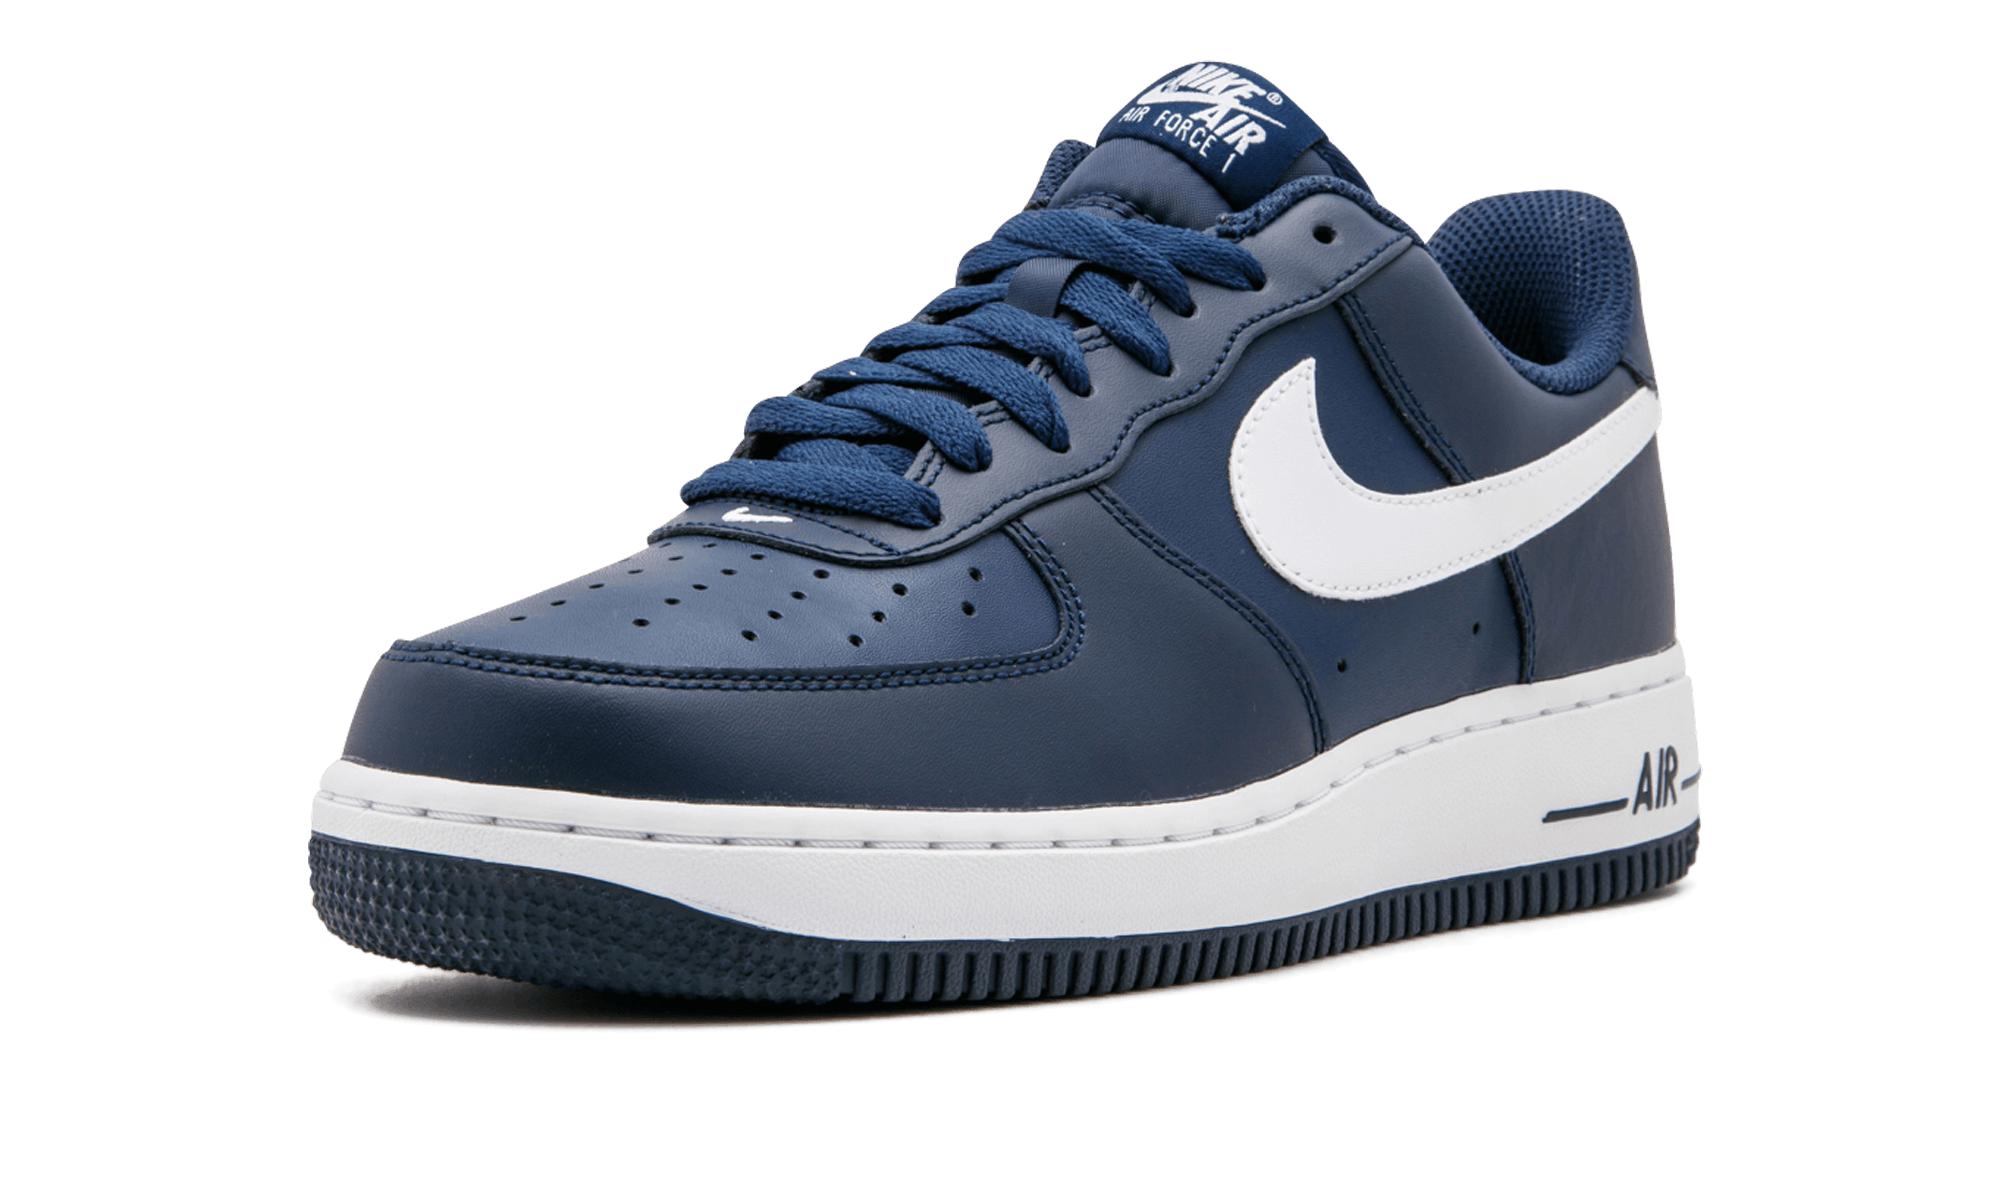 Nike Air Force 1 - 488298 436 in Navy,White (Blue) for Men - Lyst